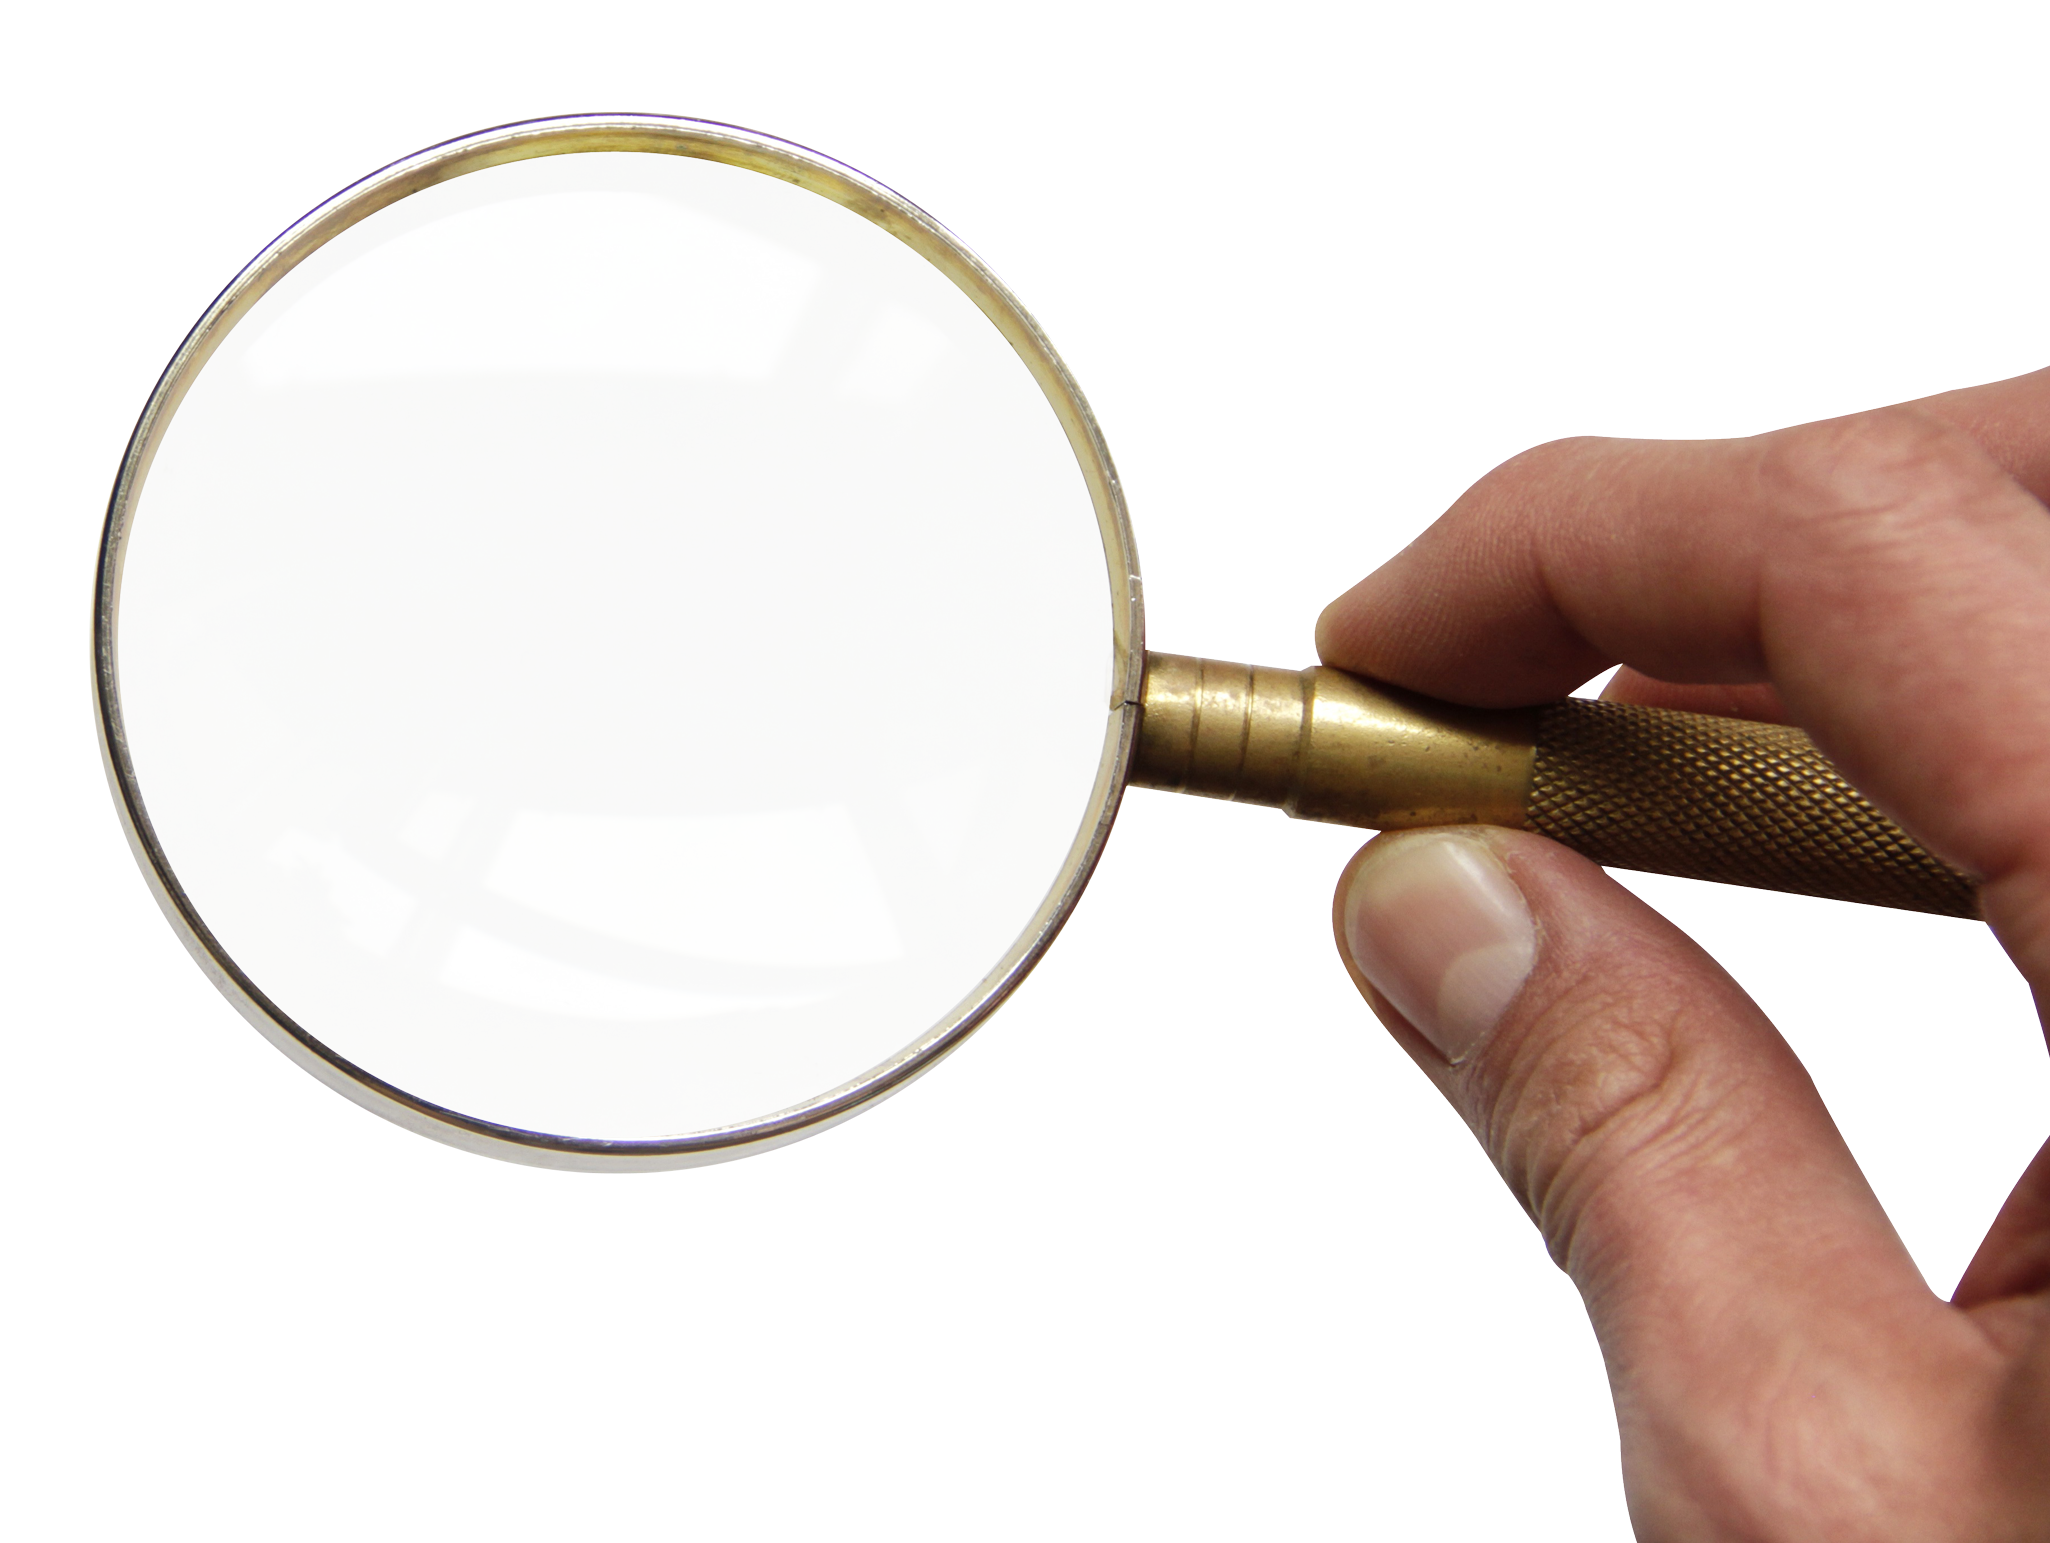 Magnifying Glass Transparent Images